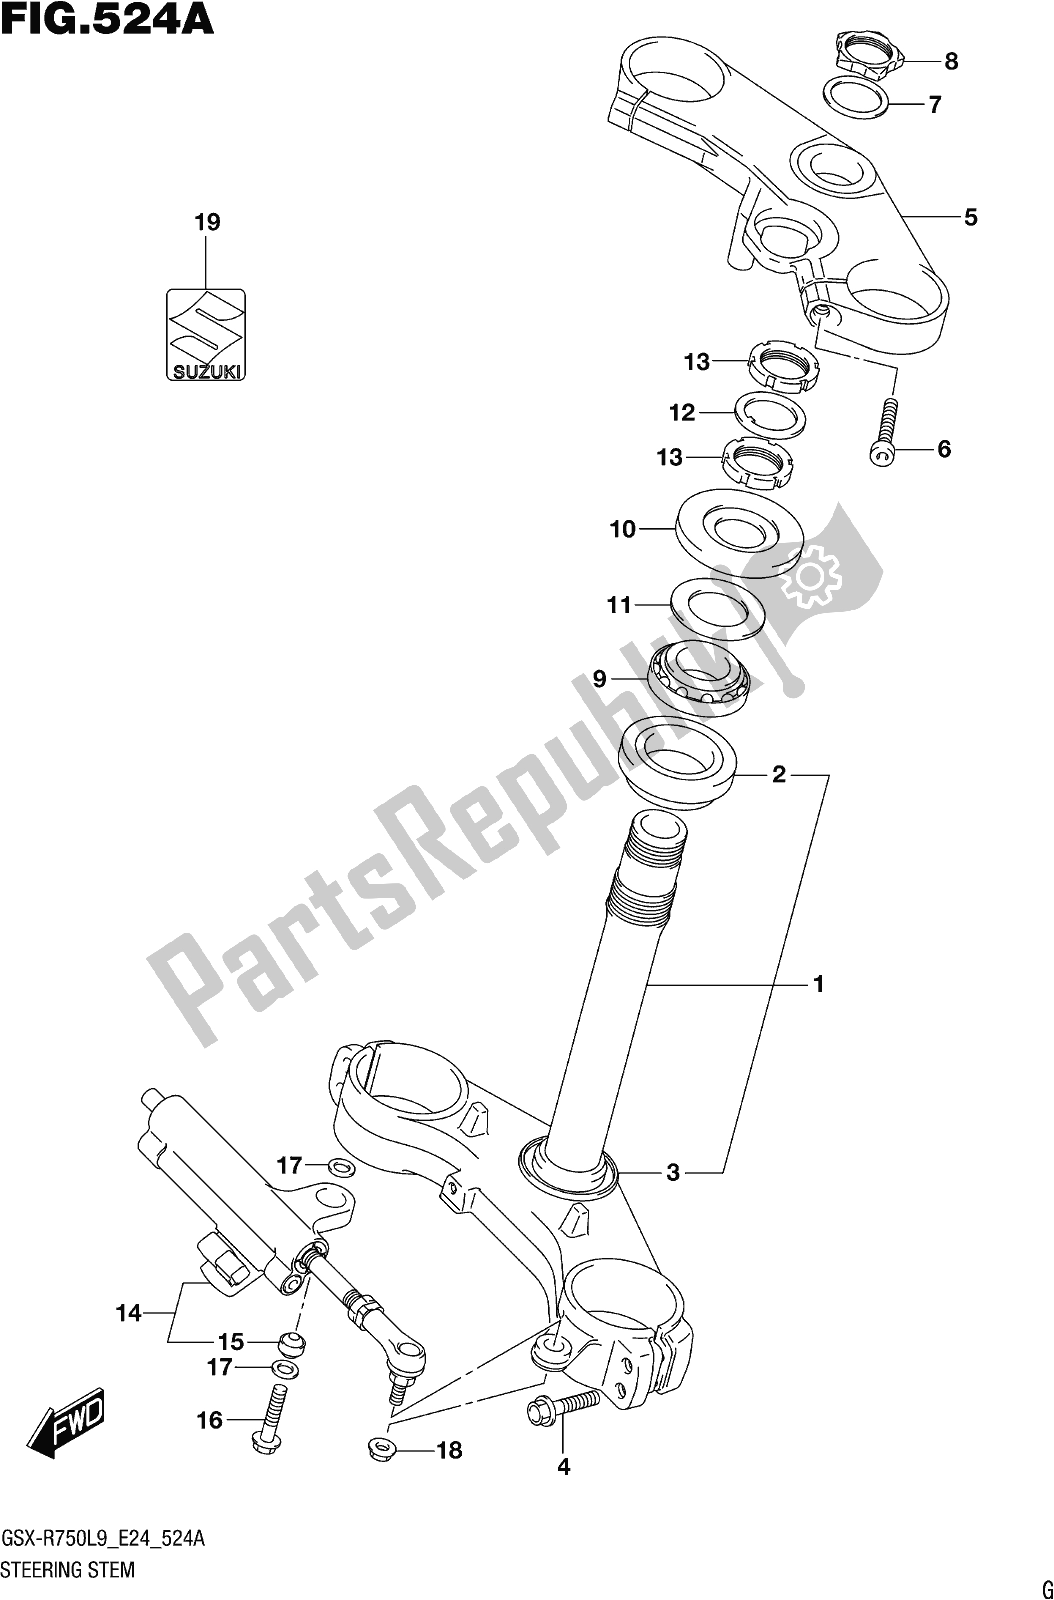 All parts for the Fig. 524a Steering Stem of the Suzuki Gsx-r 750 2019